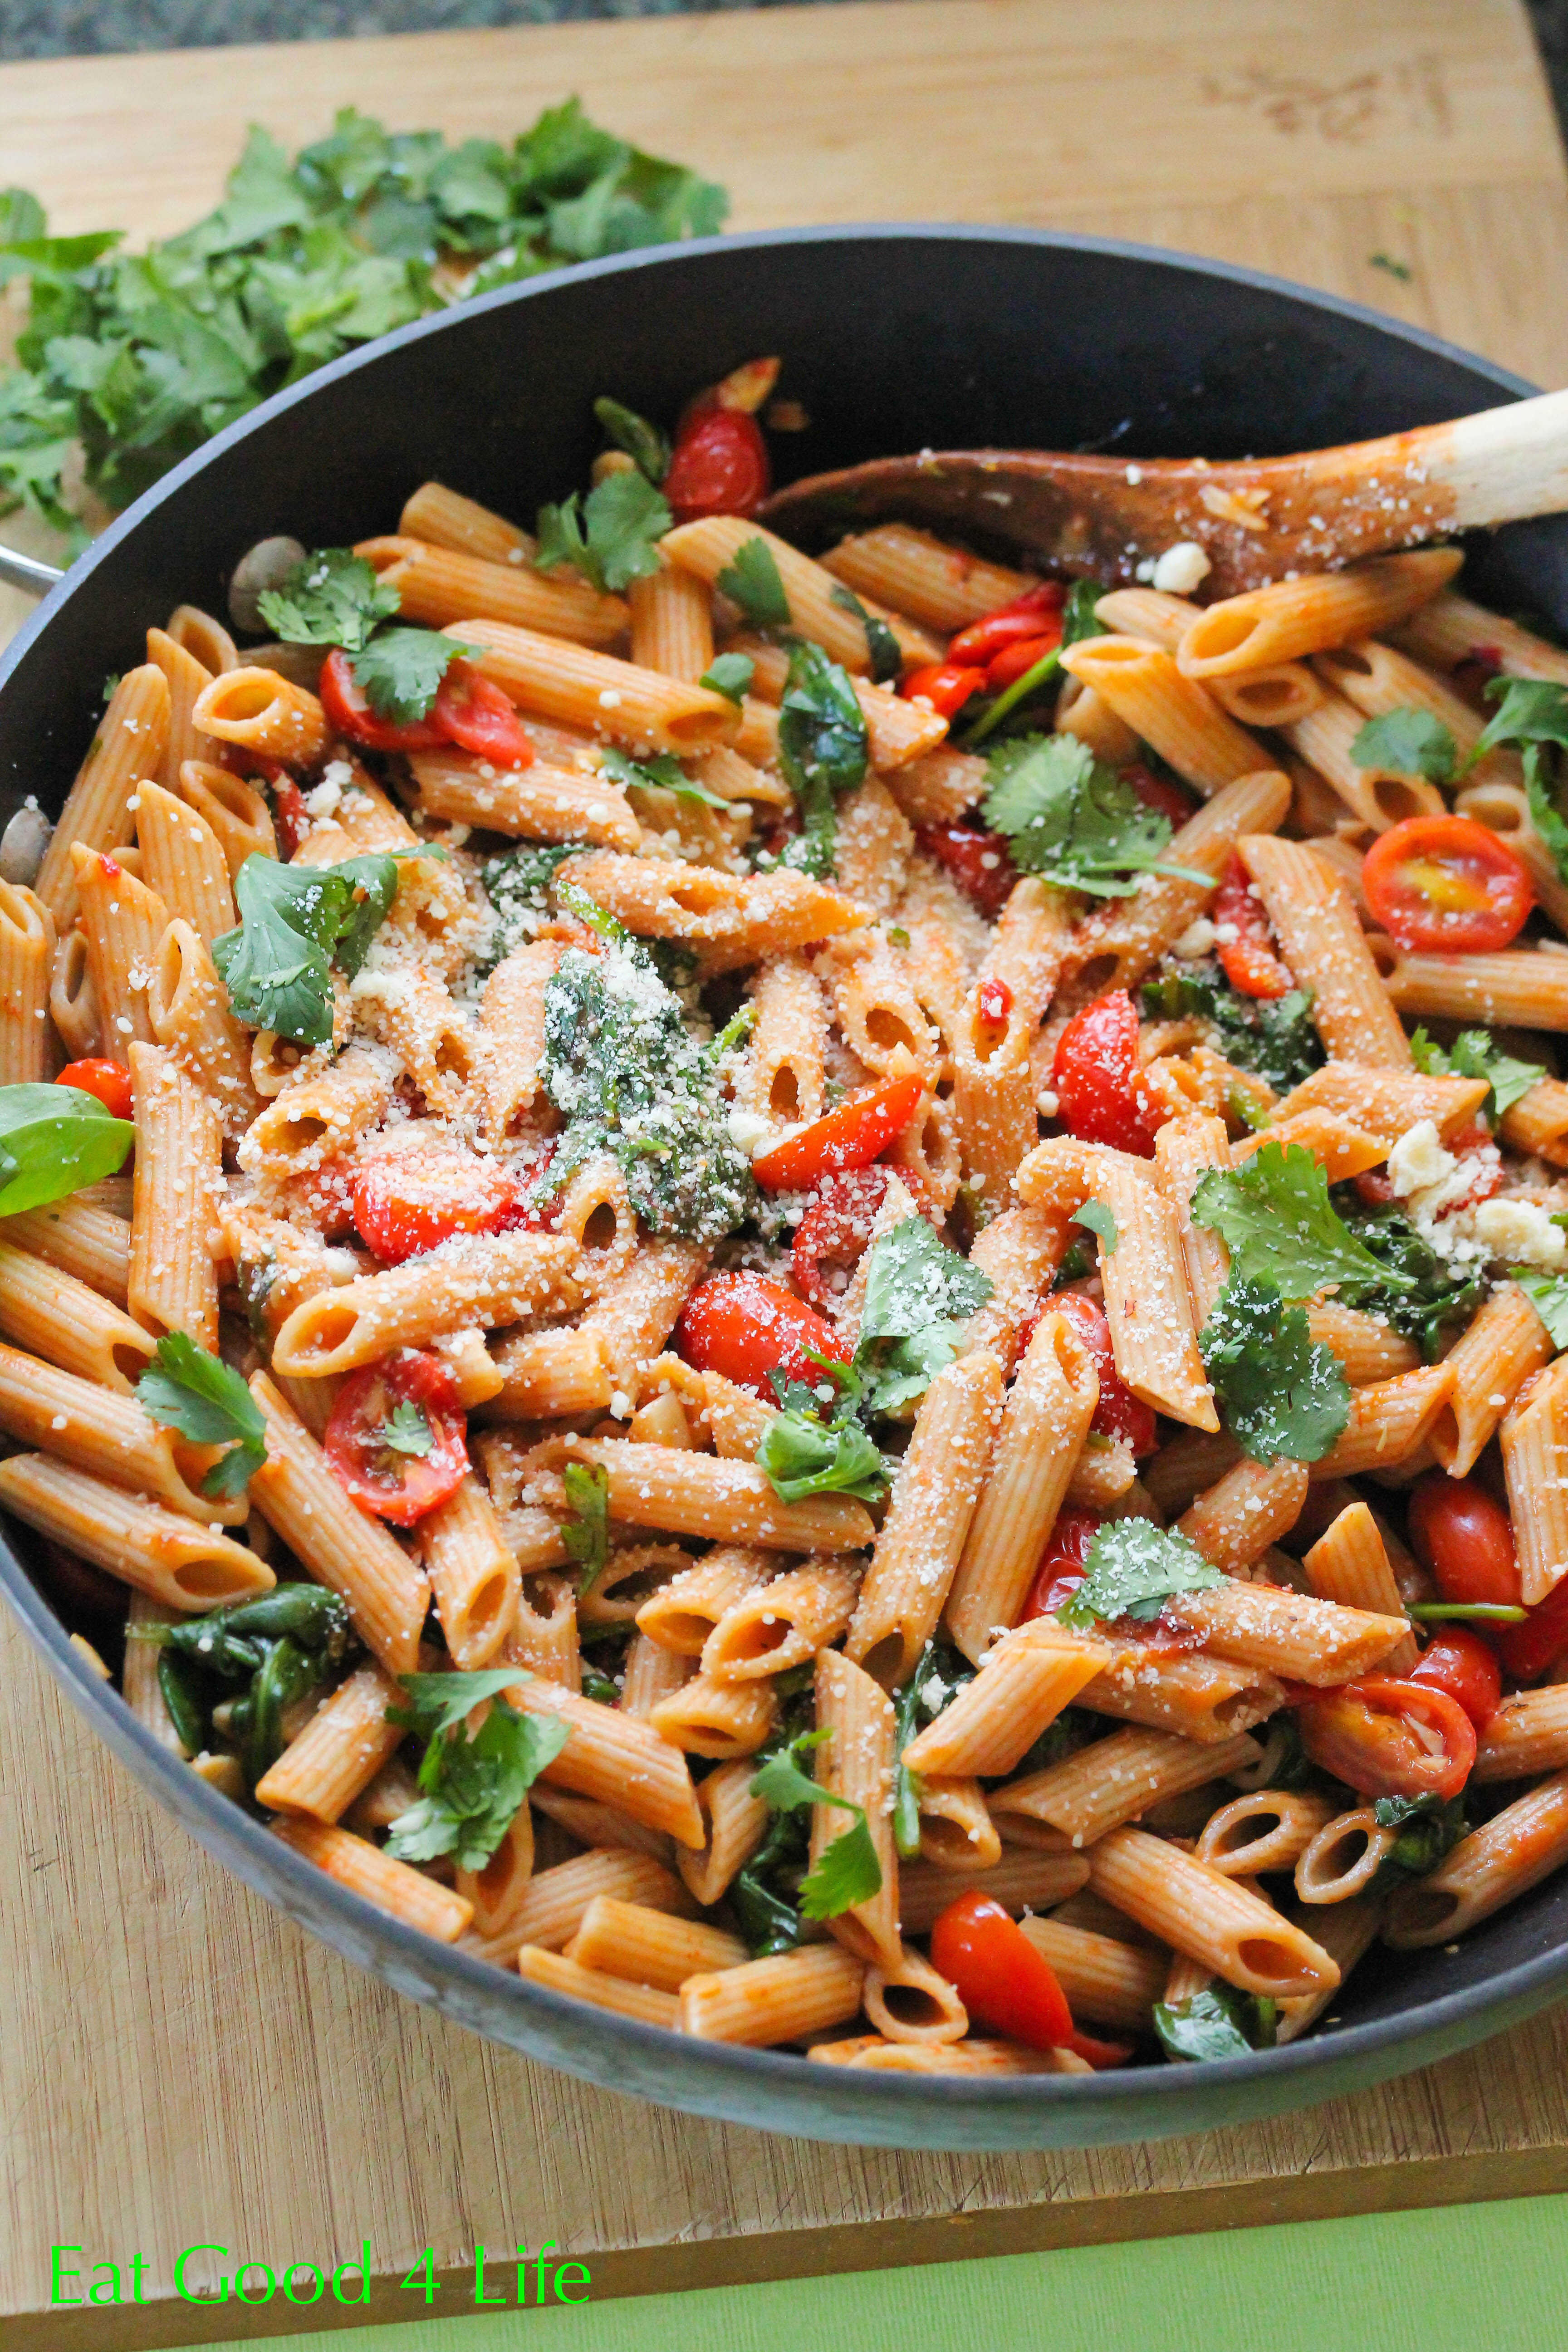 Delicious Healthy Dinner Recipes
 Fire roasted tomato pasta